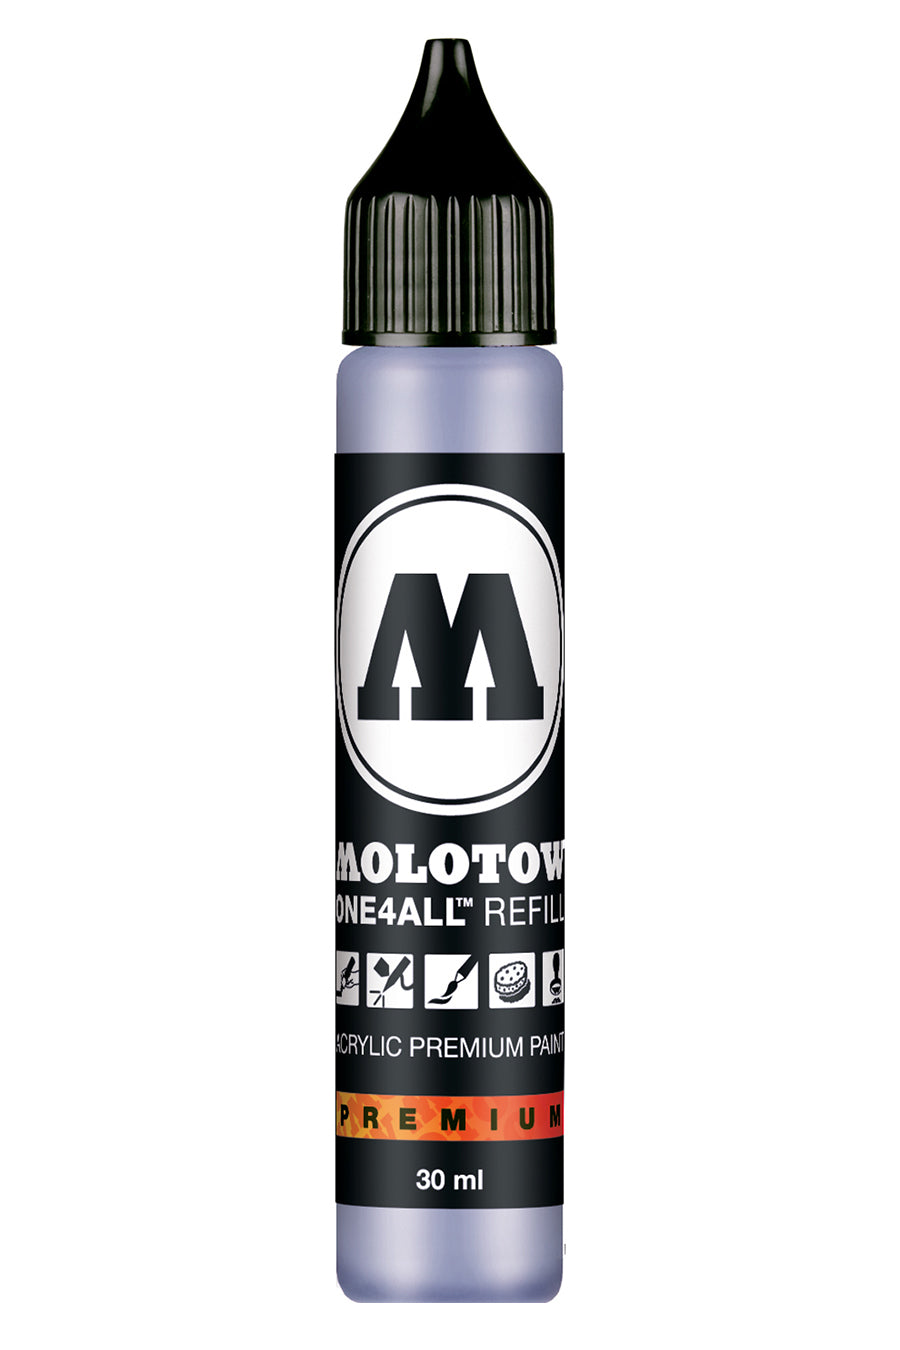 Molotow® ONE4ALL™ Refills Violet Color Family